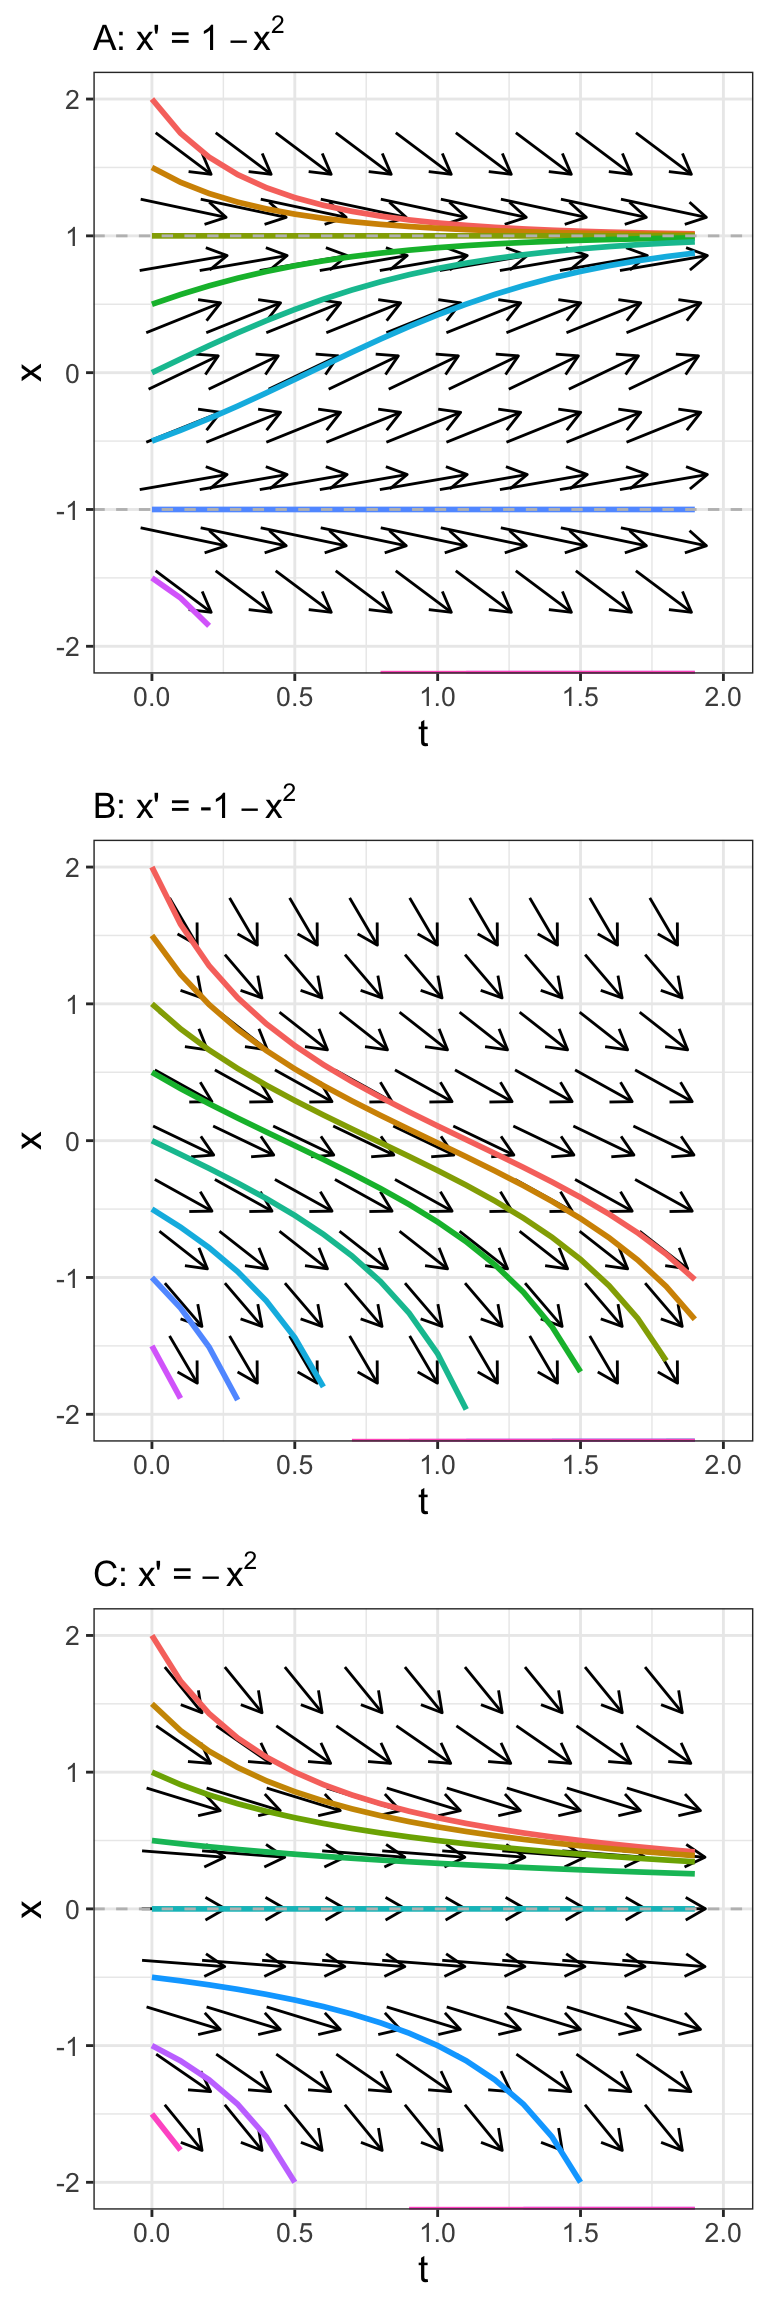 Phase plane with associated solutions for $\displaystyle x'=c-x^{2}$ for different values of $c$. The dashed grey lines are equilibrium solutions.